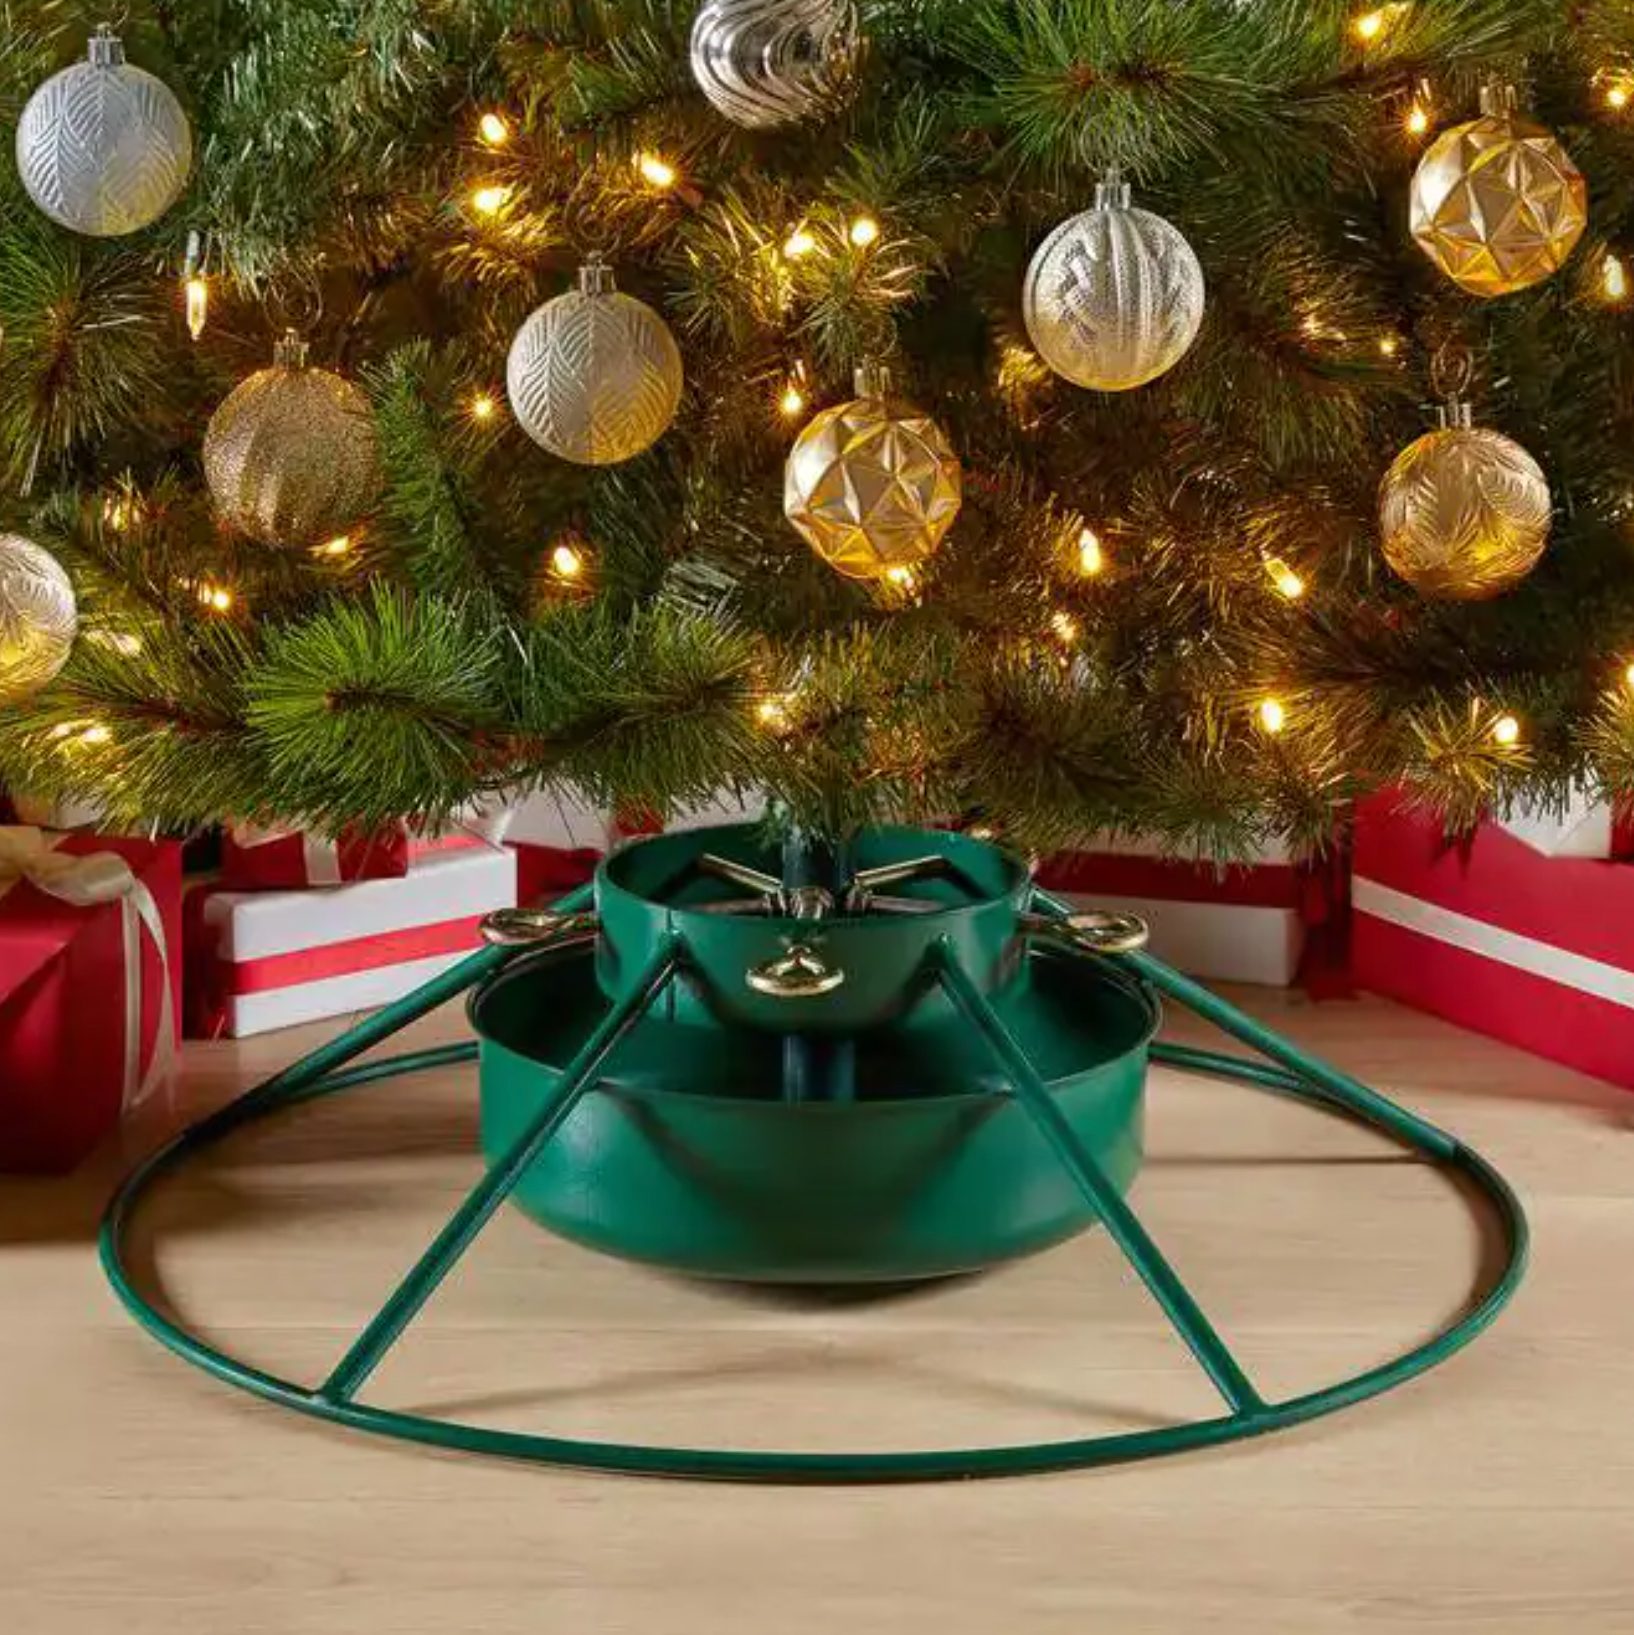 8 Best Christmas Tree Stands for Every Type of Tree